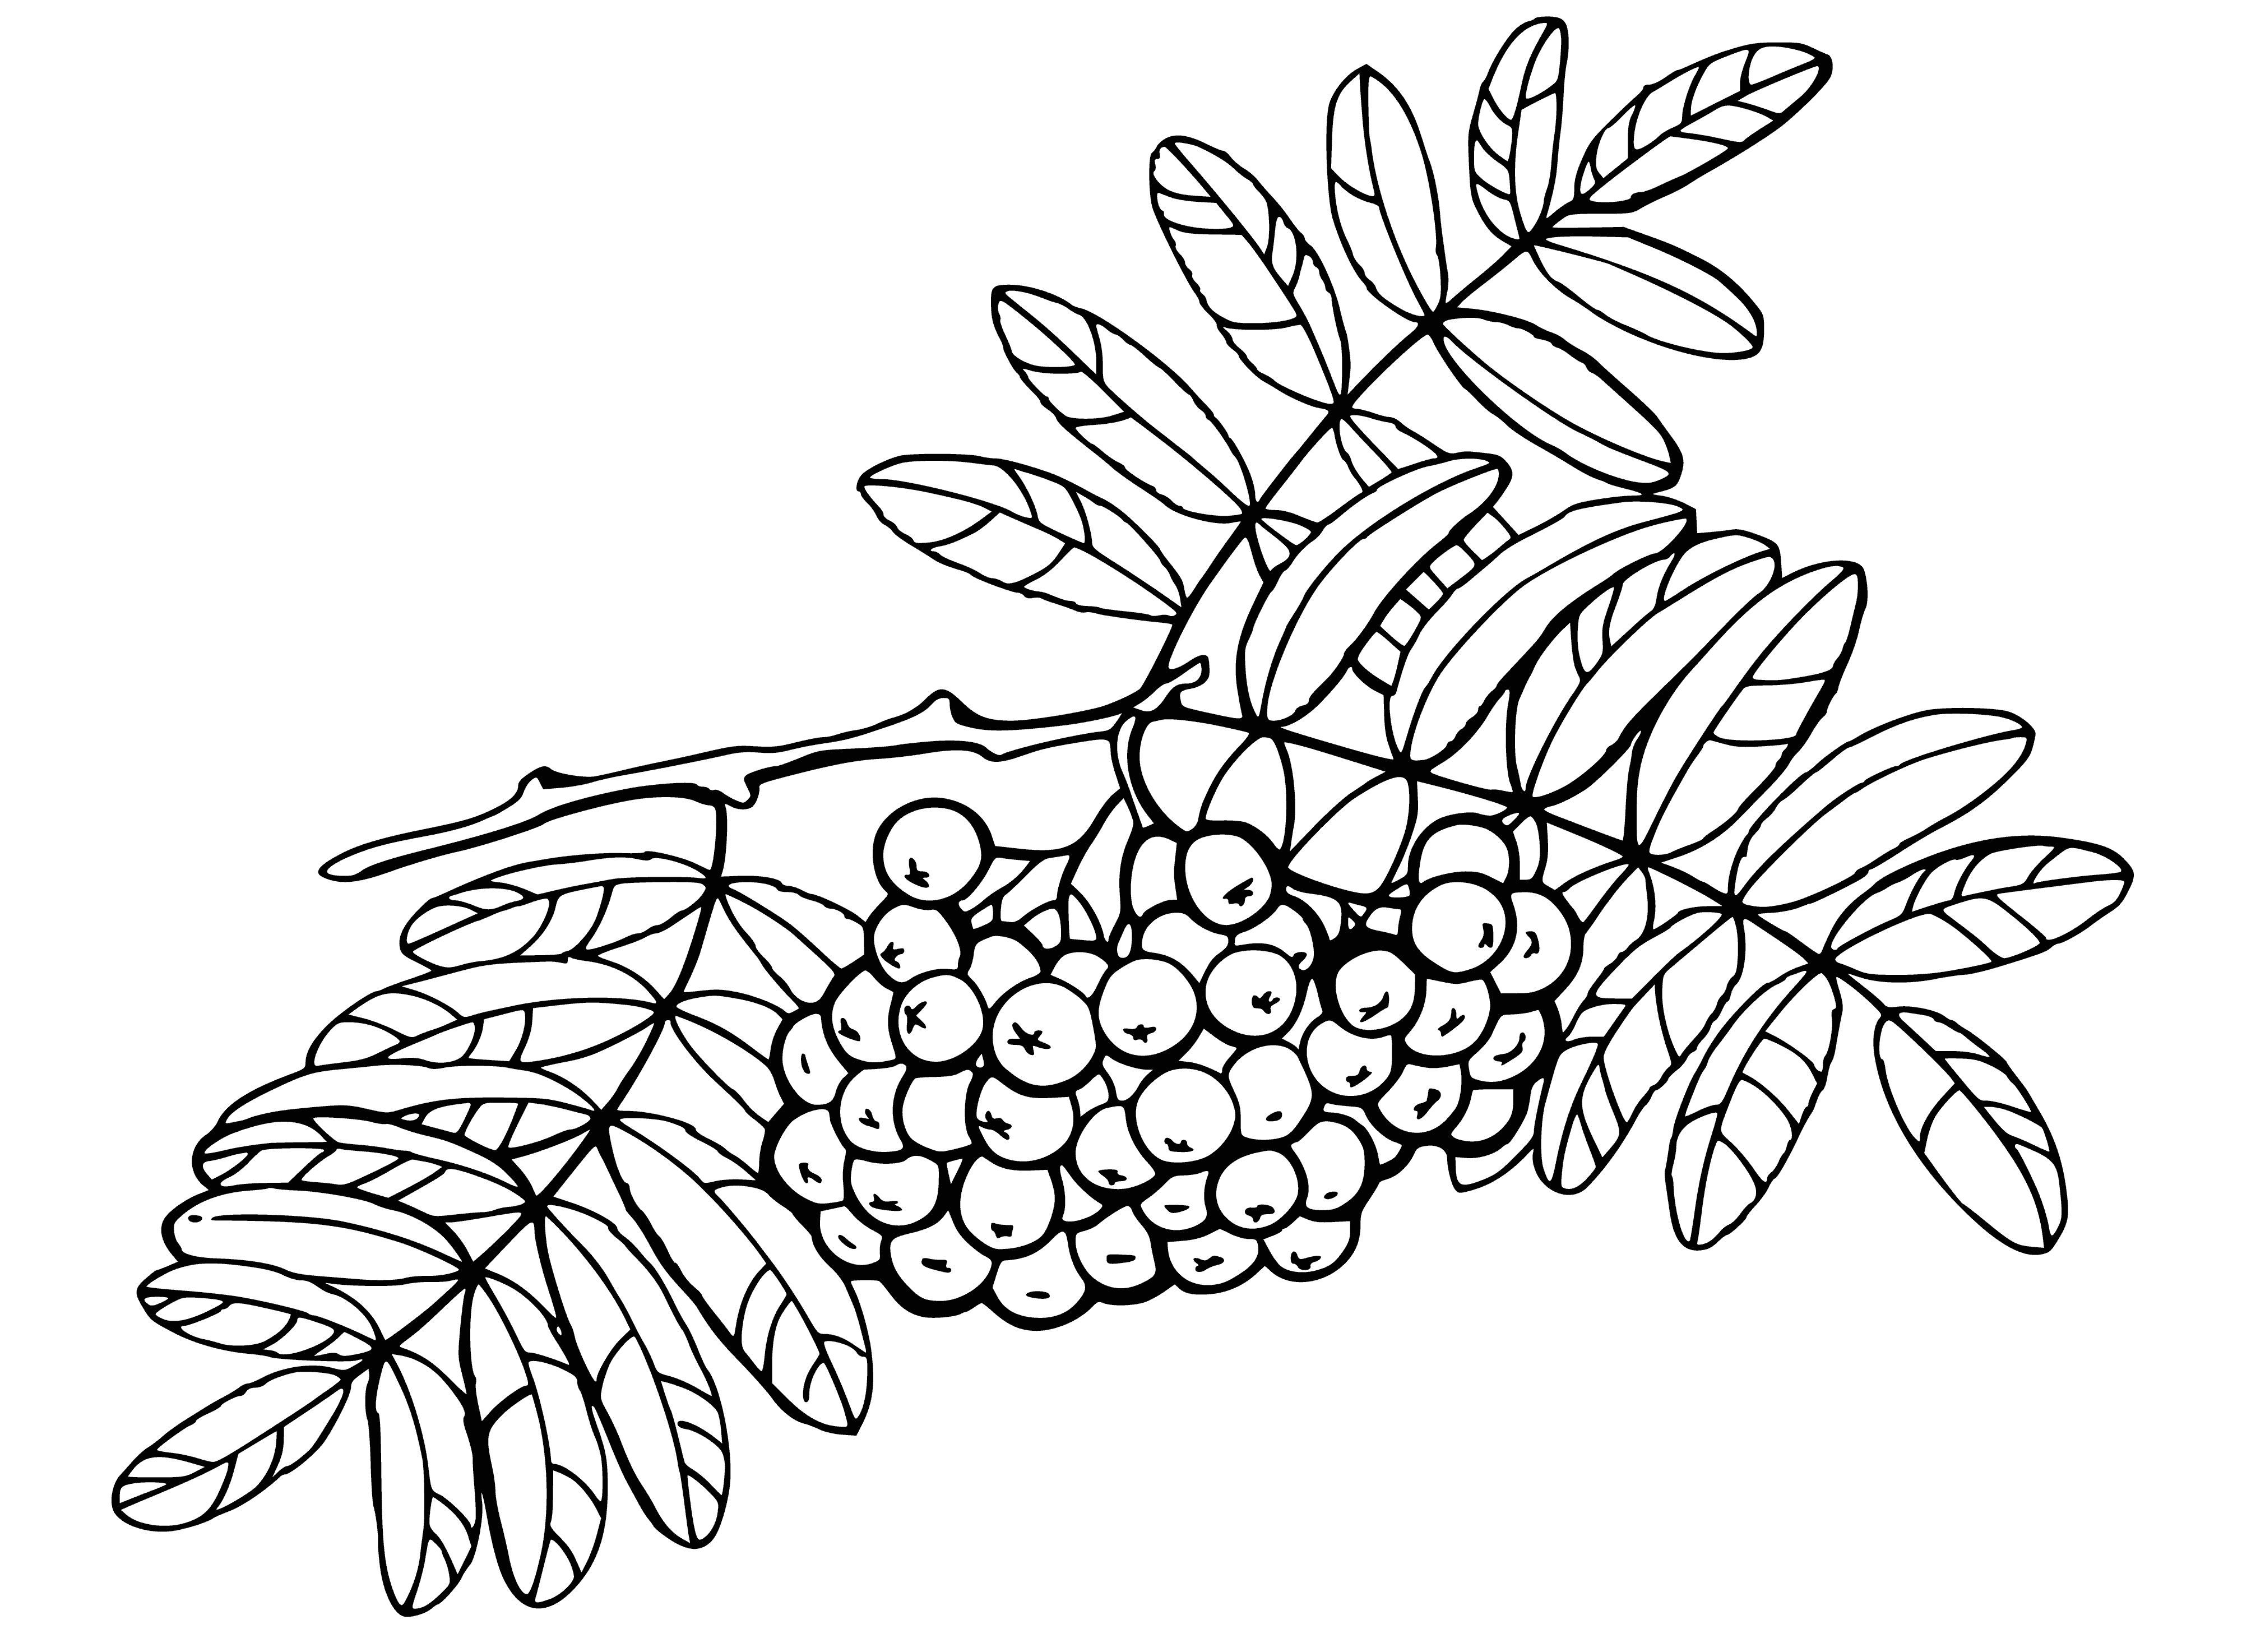 coloring page: A wooden brush with soft, curved bristles and a light brown, textured handle grip.